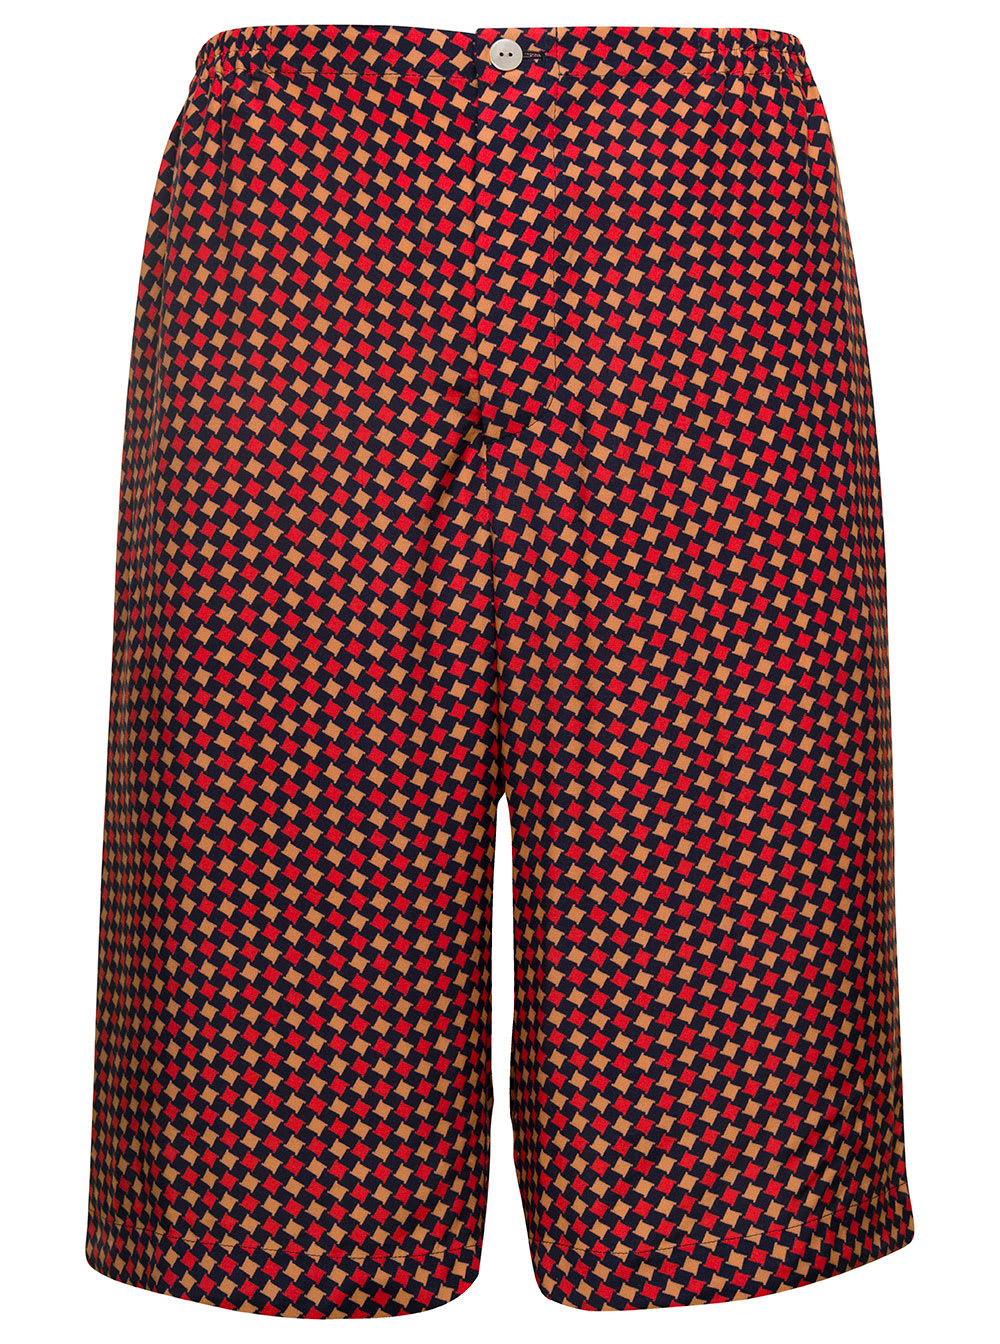 GUCCI RED GEOMETRIC HOUNDSTOOTH PRINT SHORTS IN VISCOSE MAN